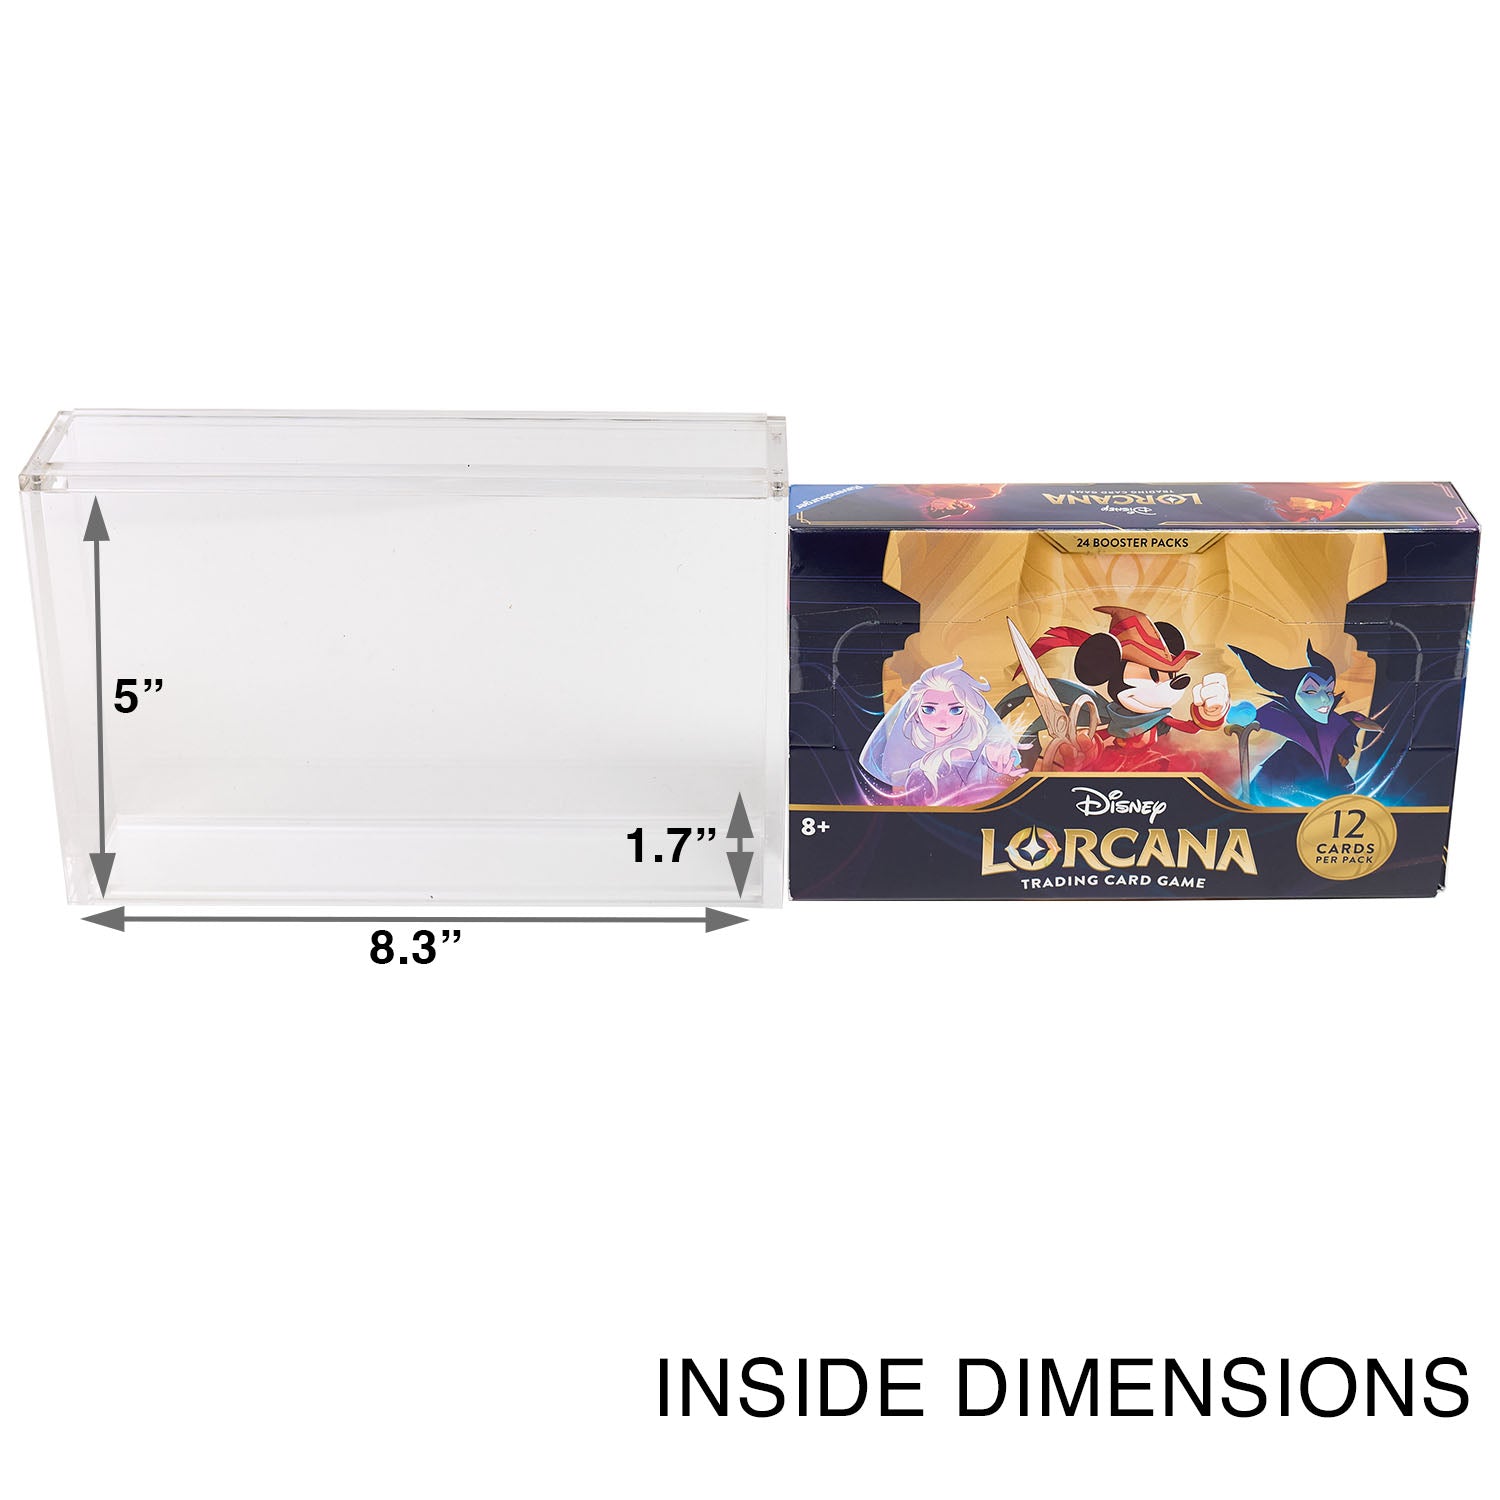 Premium Acrylic Case for Disney Lorcana Booster Box with Magnetic Top